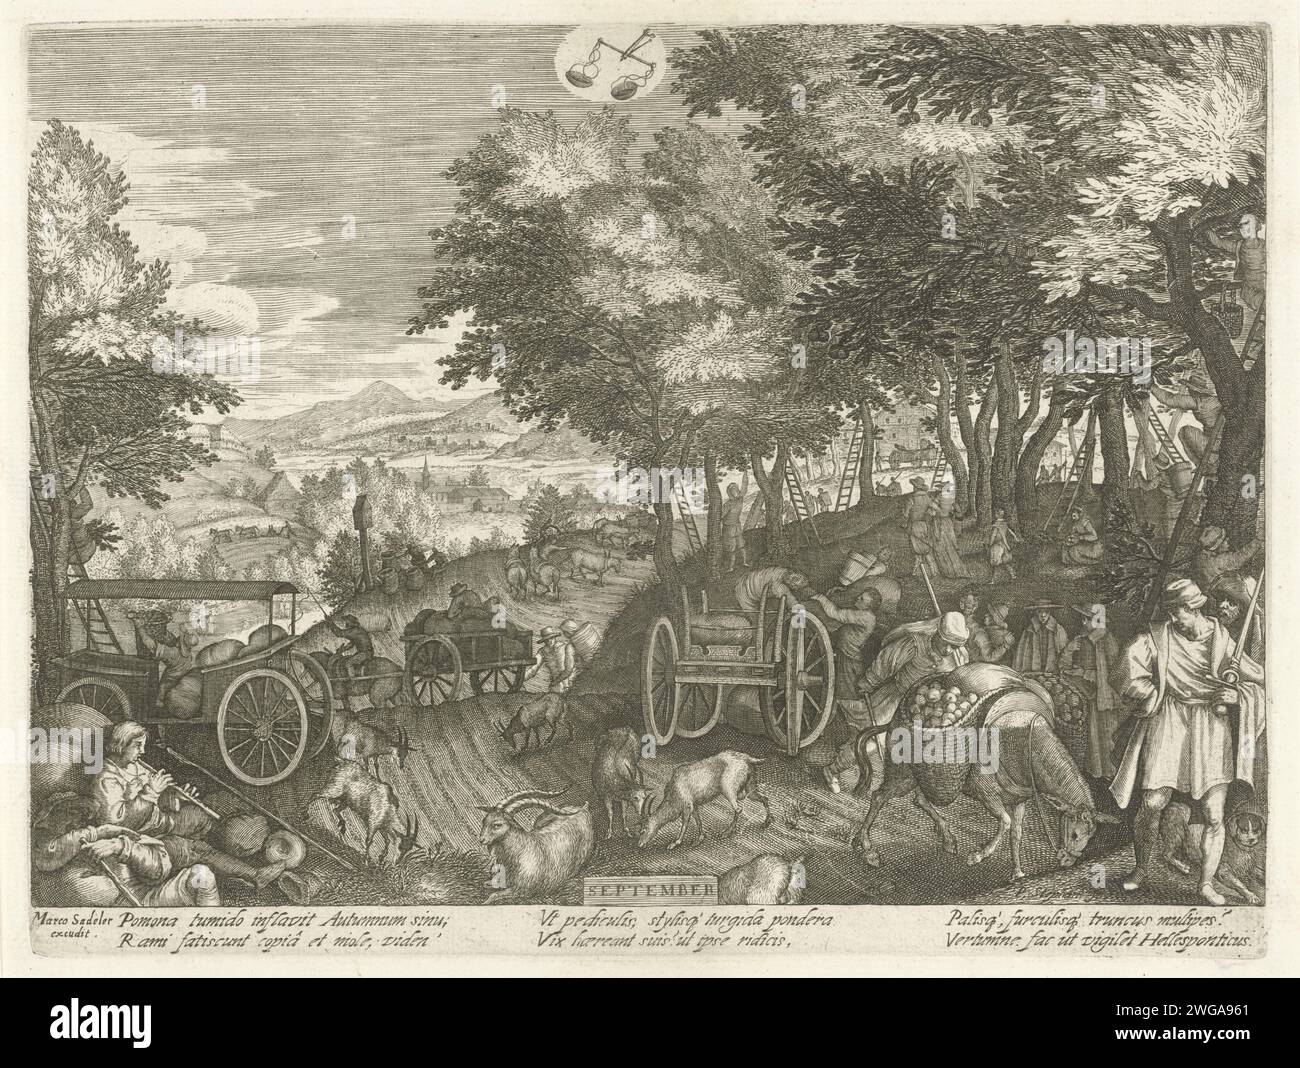 September, Giles Sadeler (2), after Pieter Stevens (1), after Pieter Stevens (2), 1624 - c. 1650 print September is the fruit month. On the right an orchard in which the apples are picked. They are collected in baskets and transported by donkey or farm carts. Left front a whistling shepherd, sitting on the floor with a small herd of goats. Hilly landscape with chapel along Landweg. The print has a Latin caption. print maker: Praagpublisher: Venice paper engraving September and its 'labours' (+ with zodiacal signs). picking fruit. climbing up a tree. orchard. crafts and industries (+ transport Stock Photo